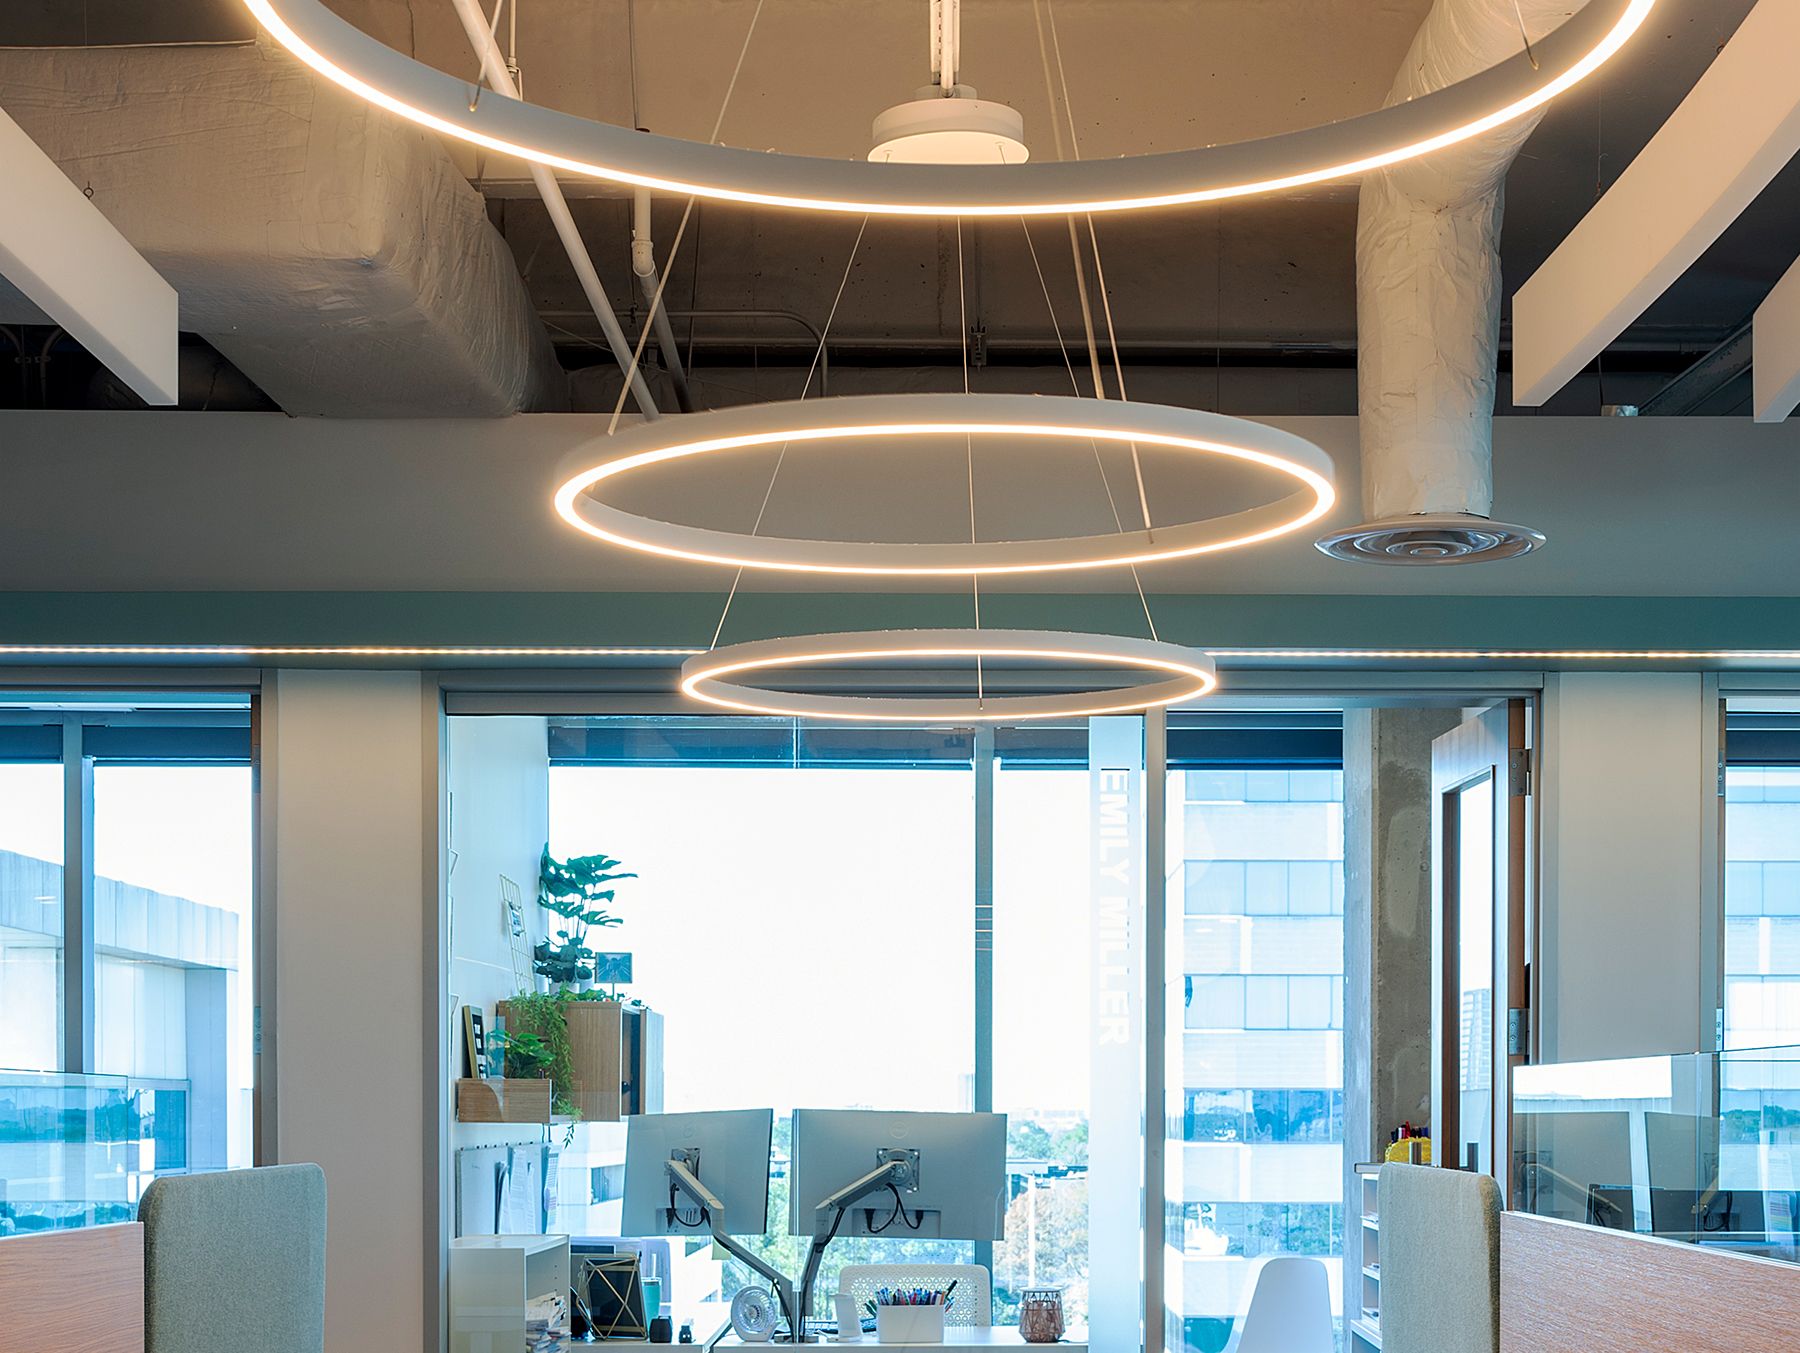 Three round LED pendant lights with a white finish illuminate the main walkway of an open floorplan office area, suspended by adjustable aircraft cables.